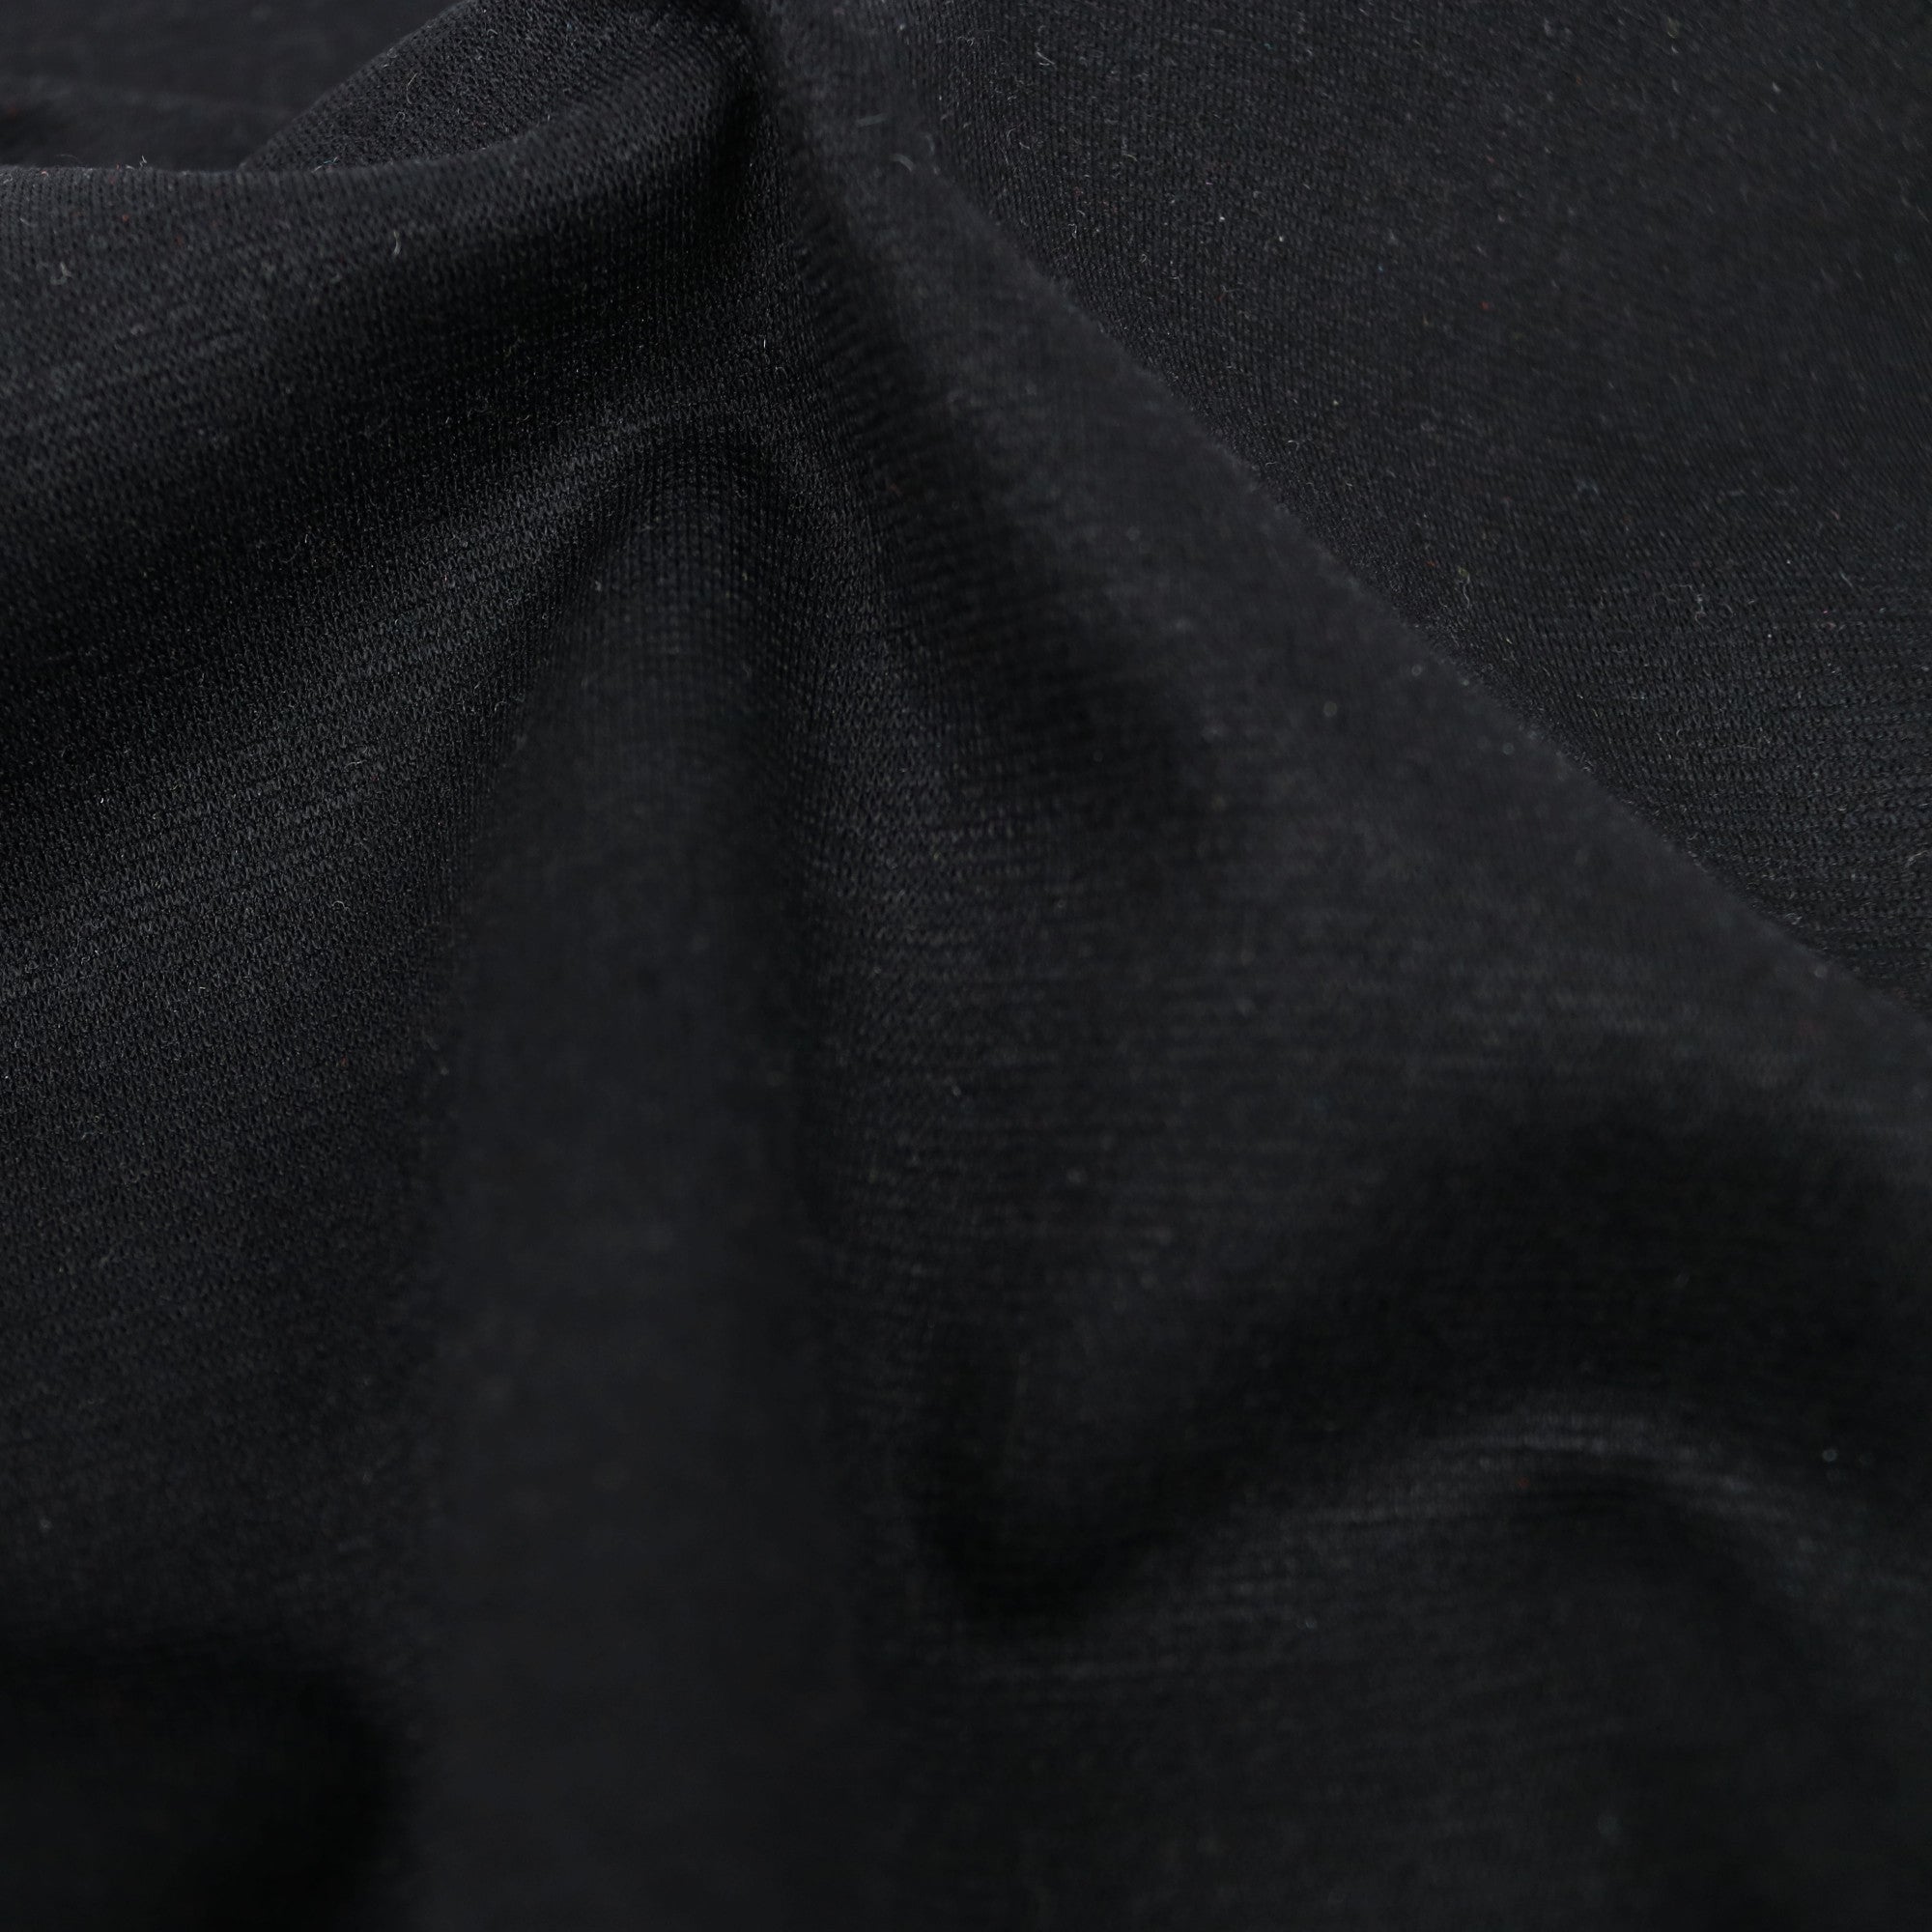 Polyester/Rayon/Spandex Wool-Touch Knit Fabric by the Yard, 58-60